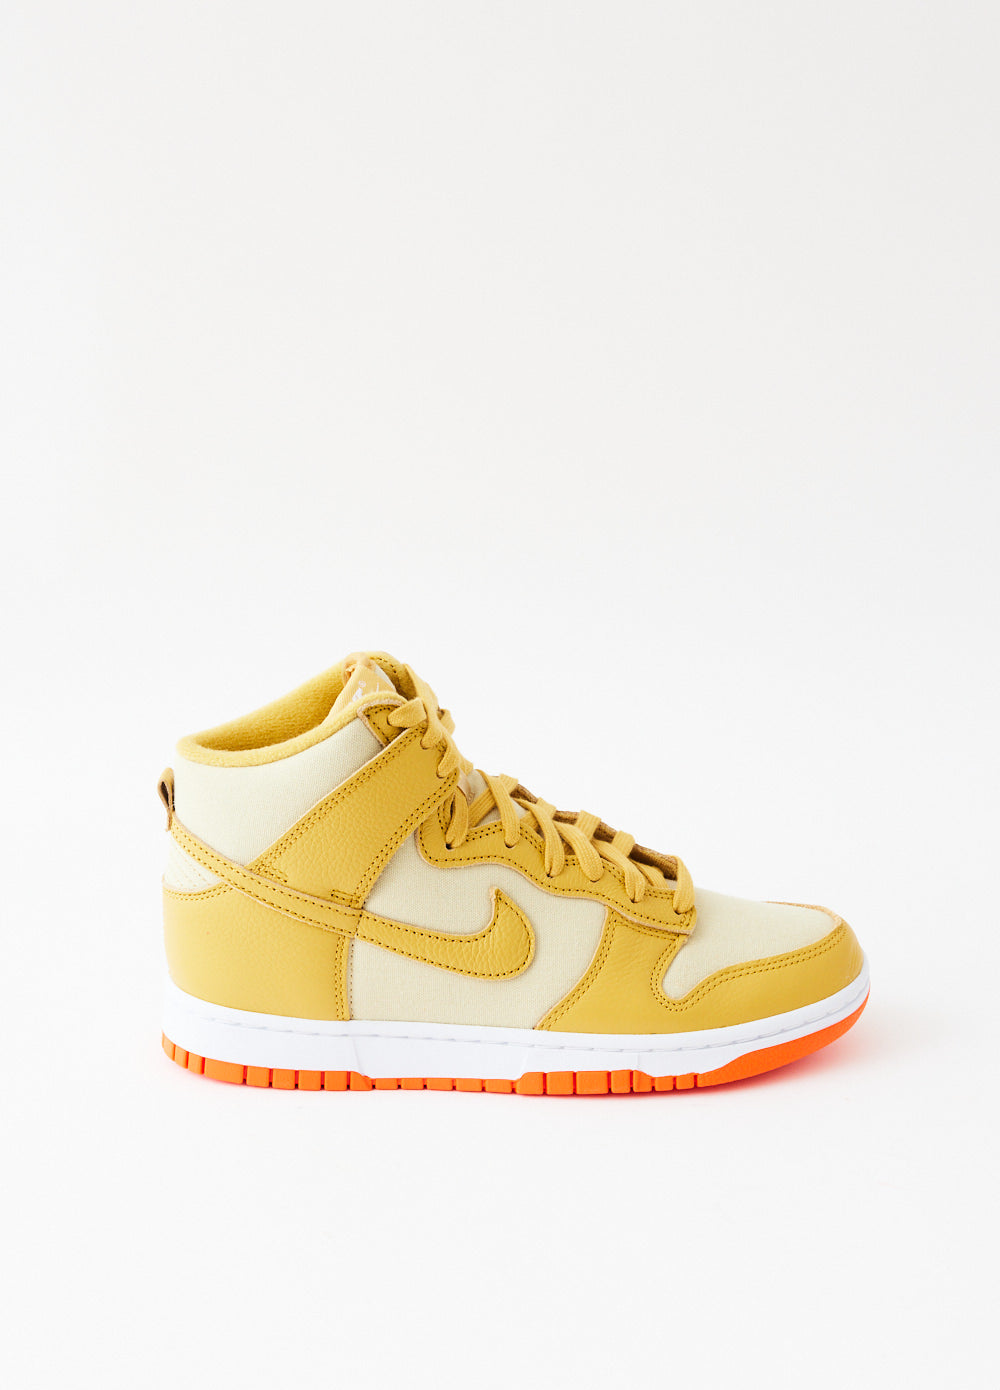 Dunk High Retro PRM 'Gold Canvas' Sneakers